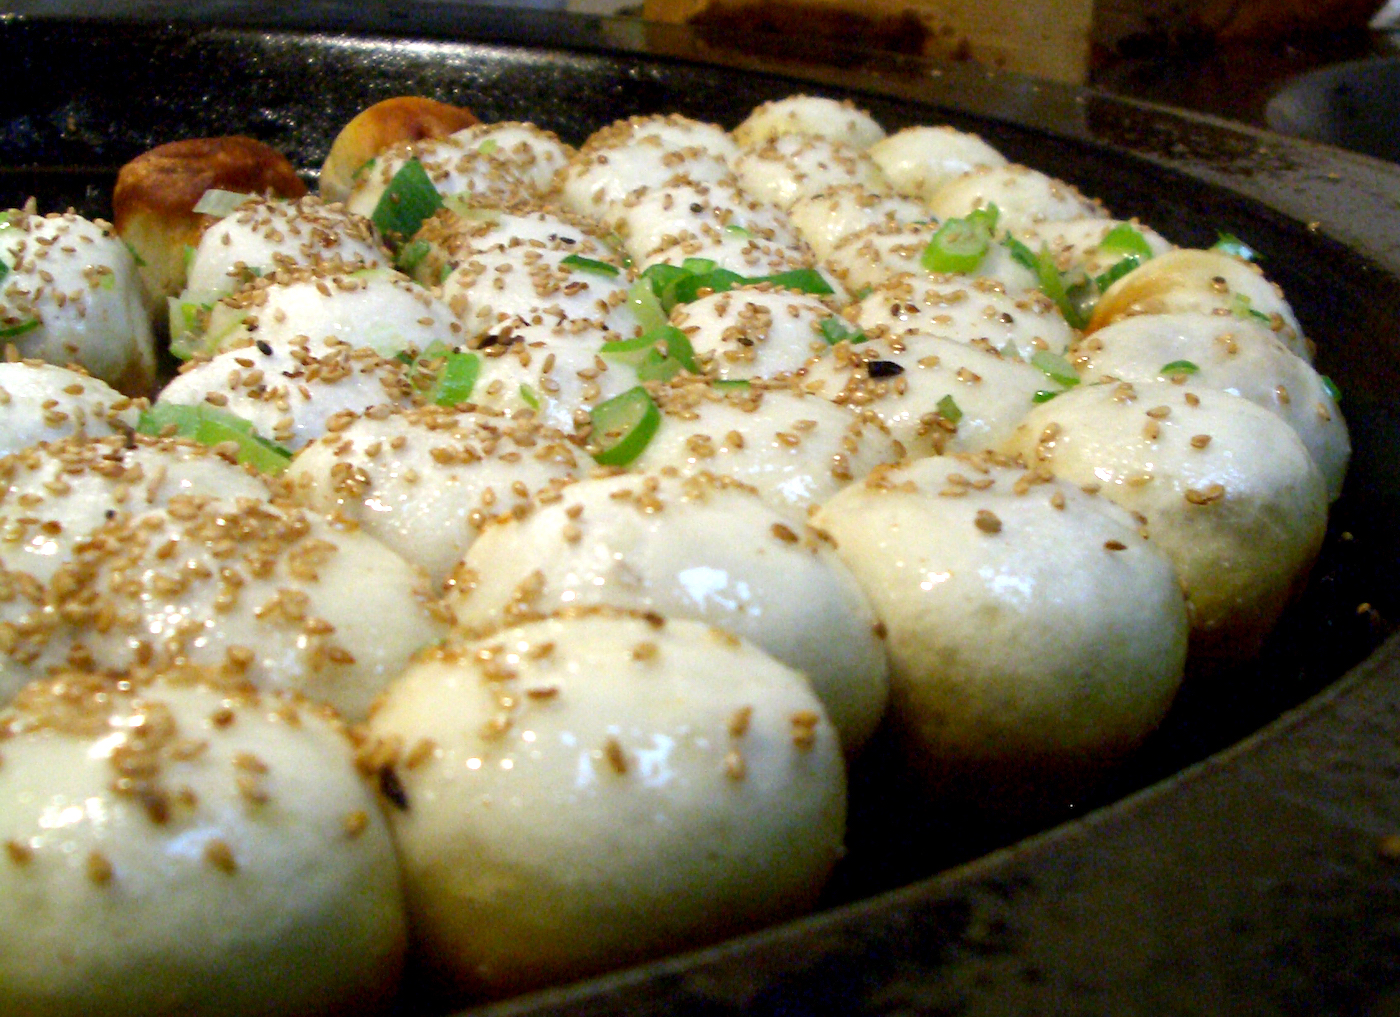 Multiple shen jiao bao, one of the types of Chinese dumplings, being cooked in a pan